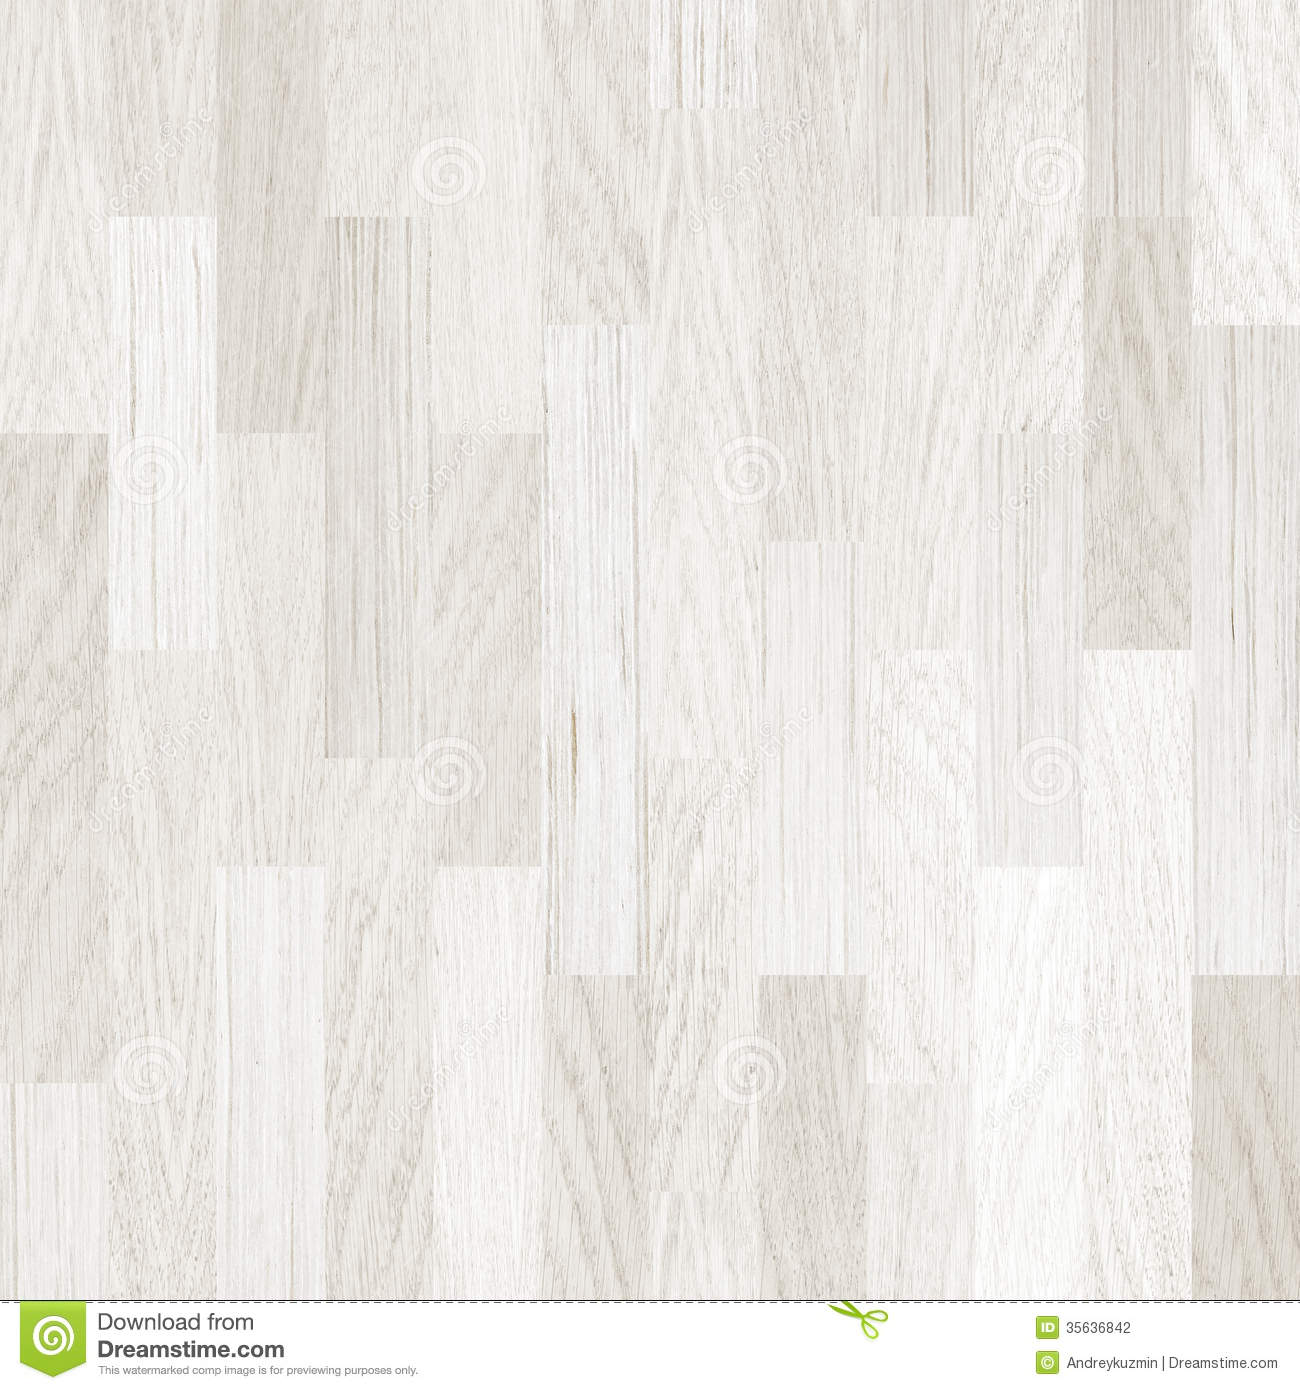 White Wooden Floor Parquet Or Flooring Stock Photography   Image